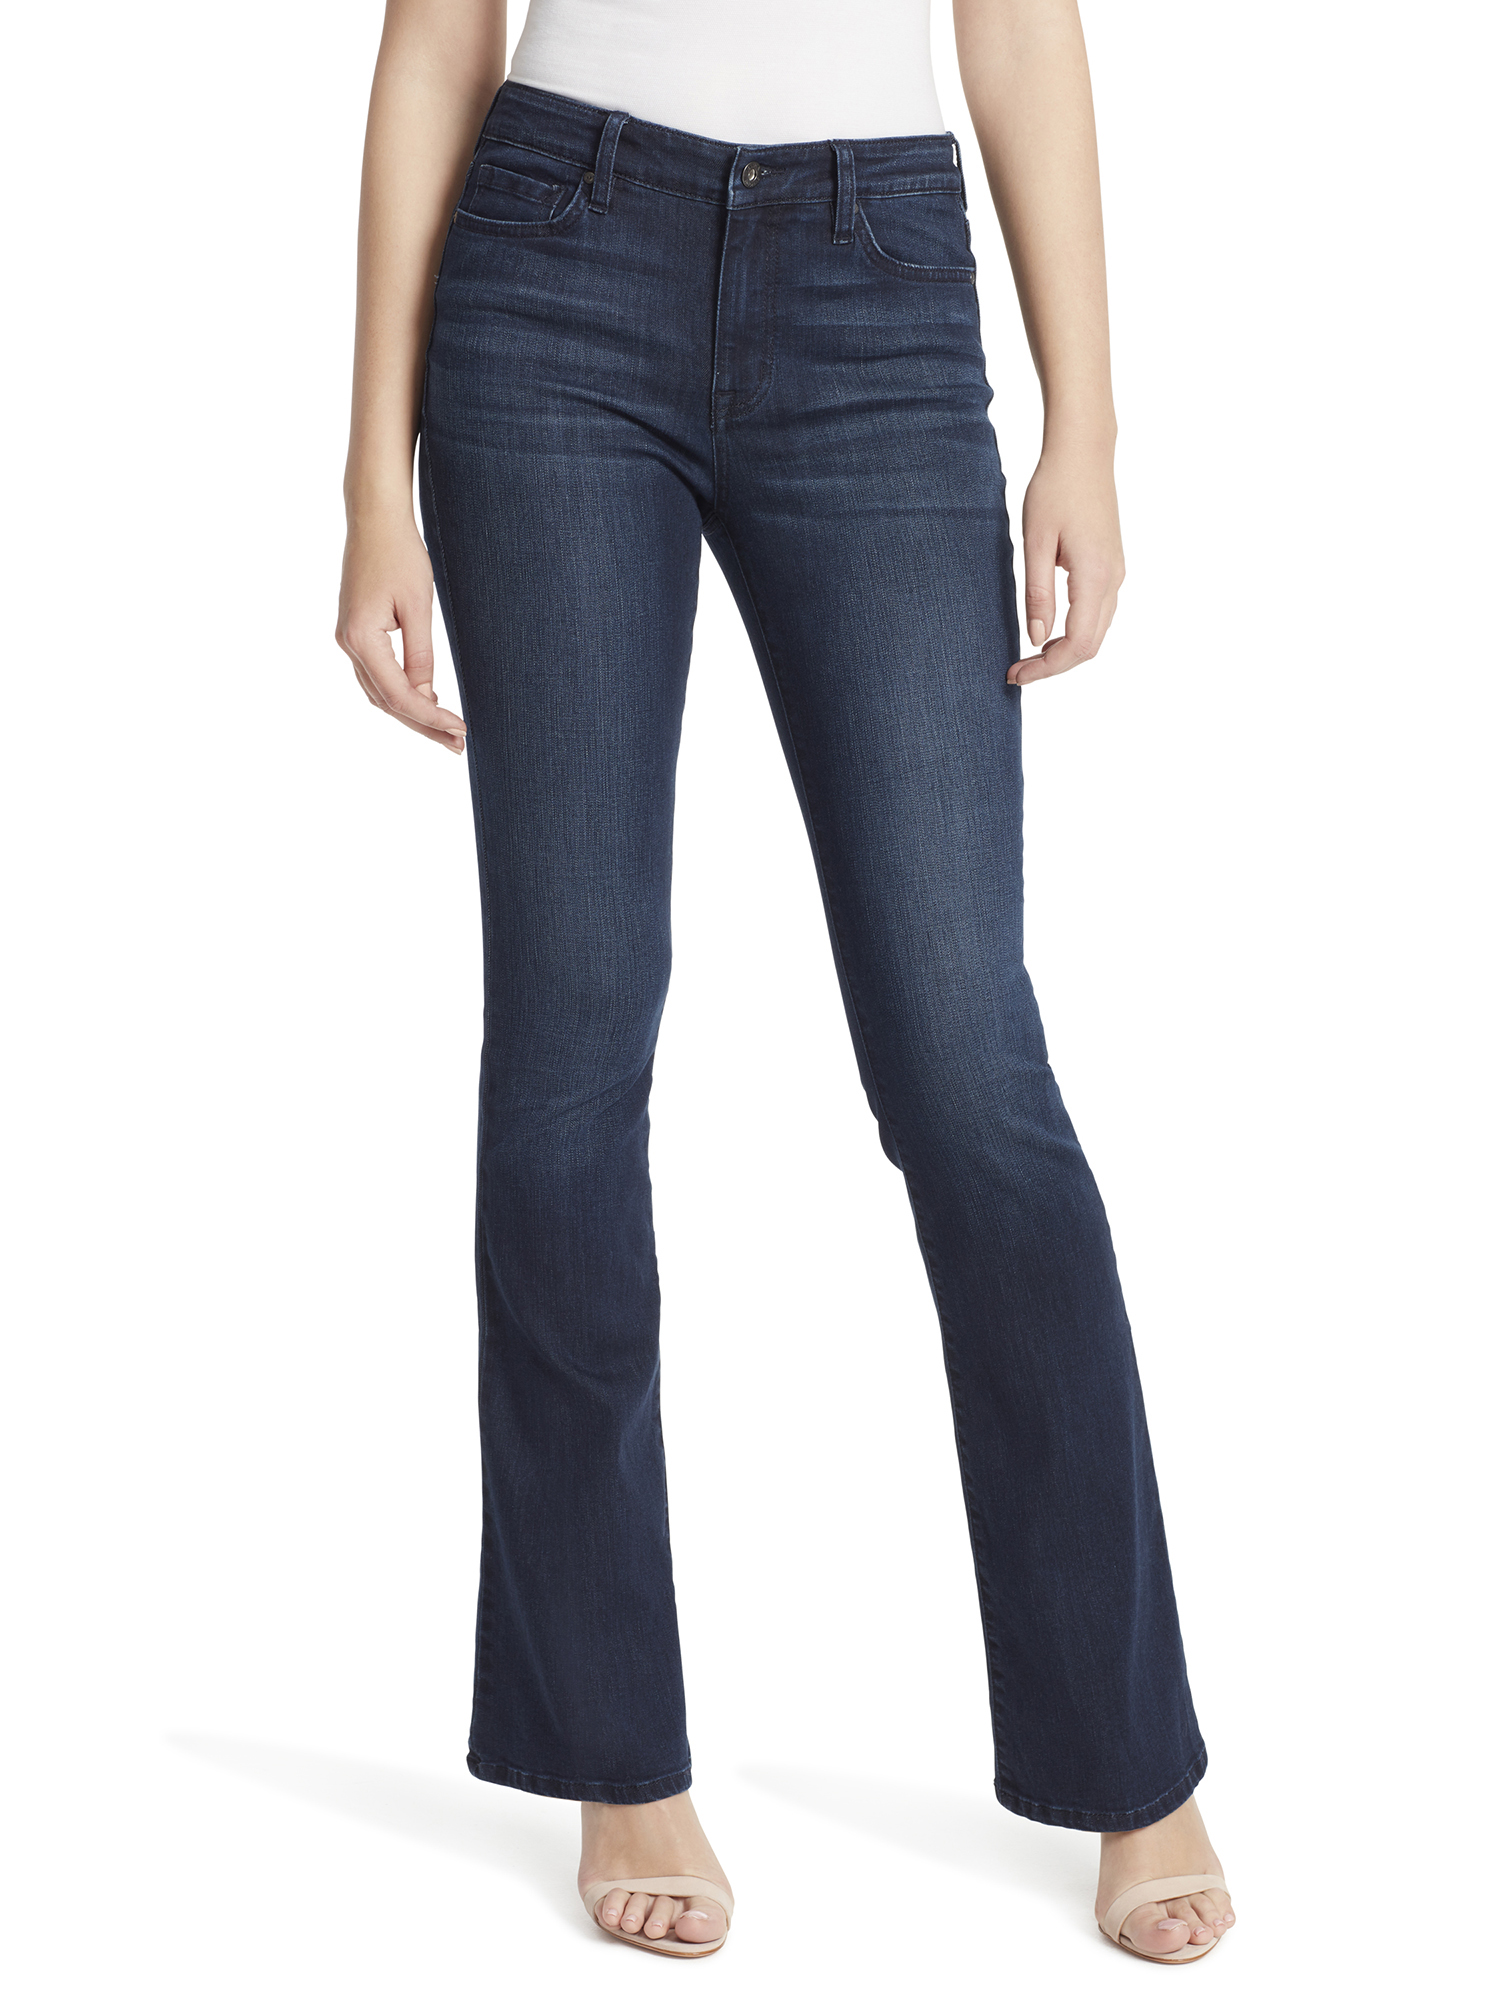 Jessica Simpson Women's Truly Yours Bootcut Jean - image 1 of 4